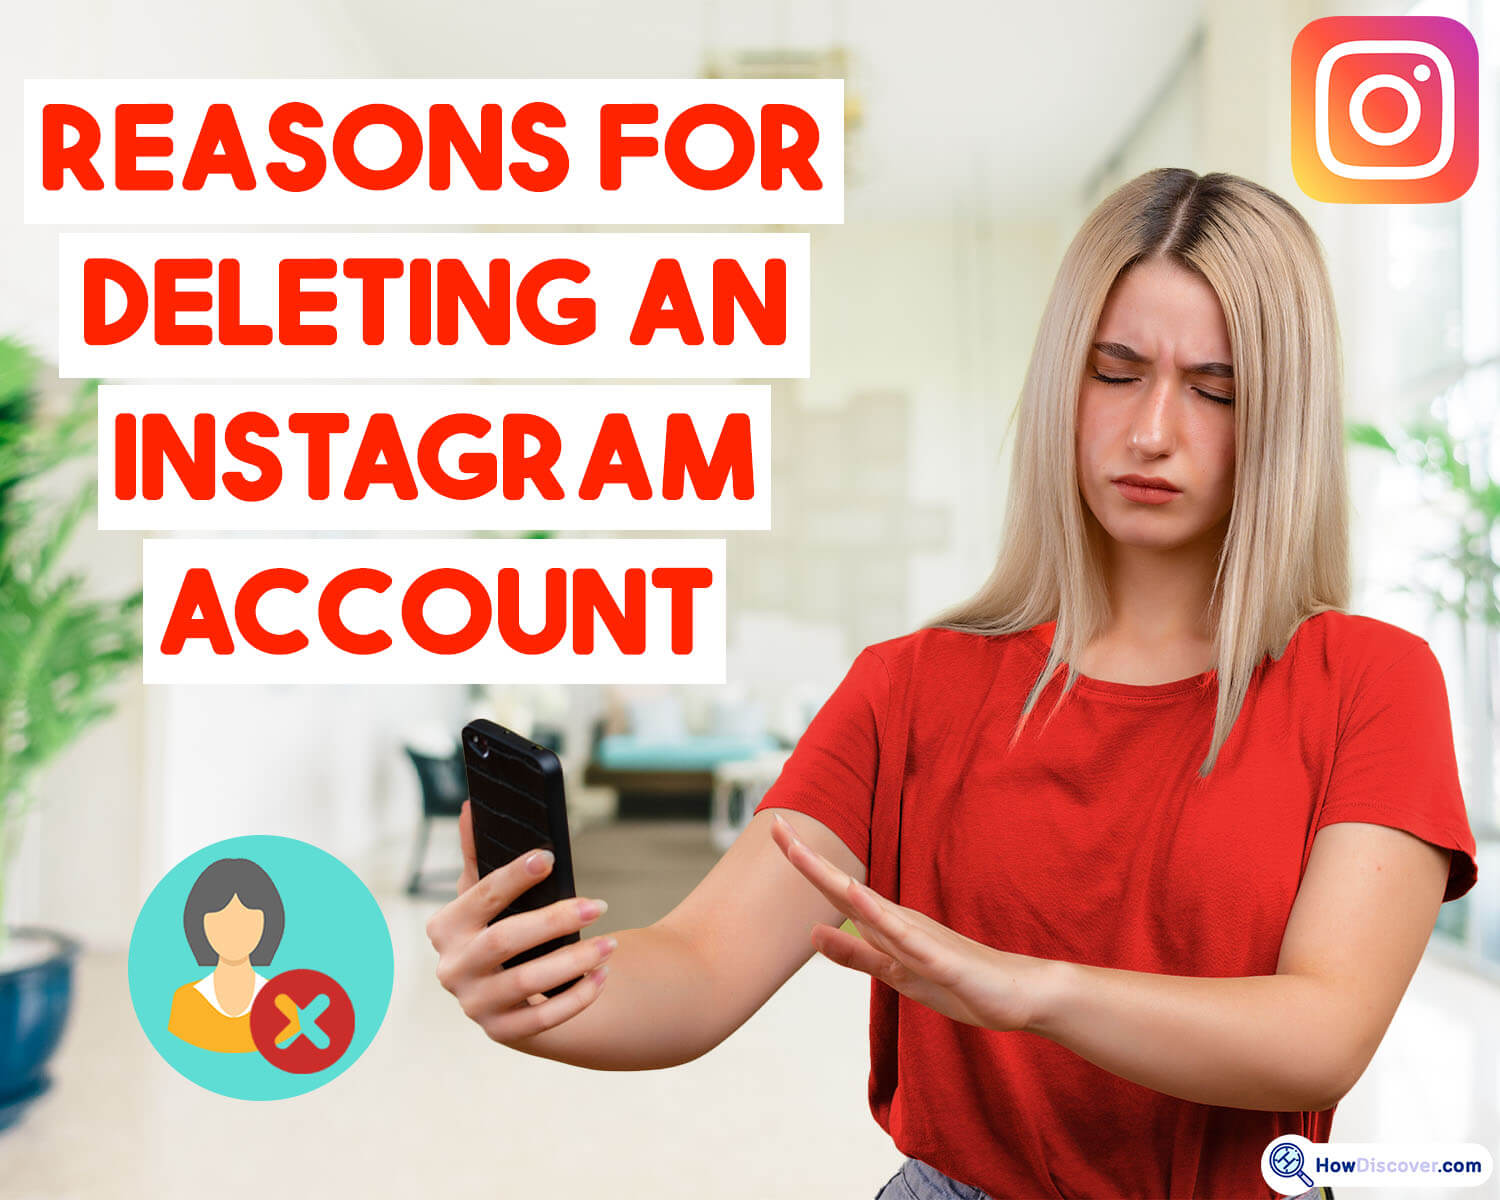 how to remove Instagram account from other devices - reasons to consider deleting your Instagram account